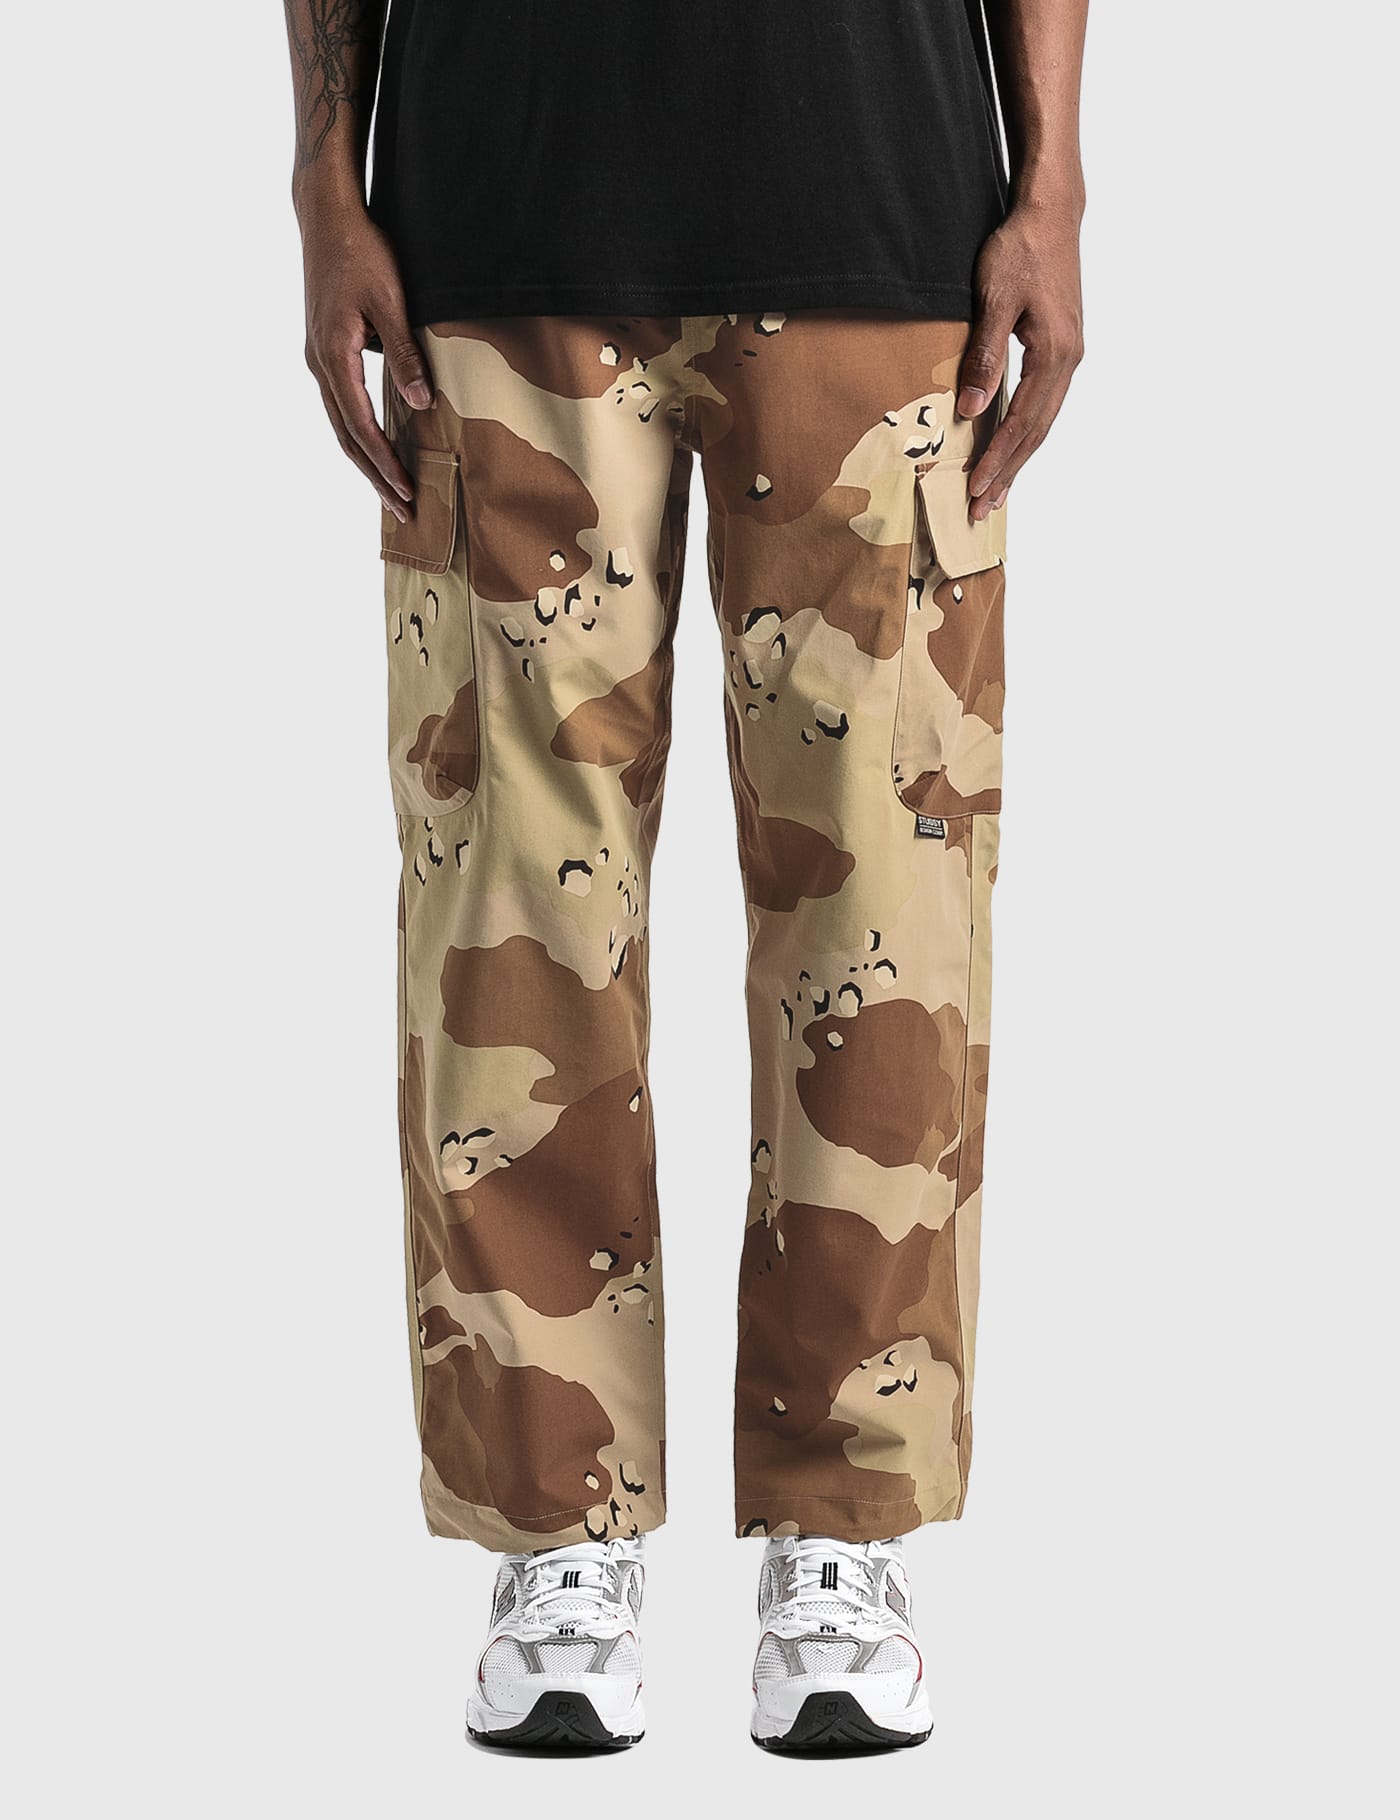 Stüssy - Camo Taped Seam Cargo Pants | HBX - Globally Curated 